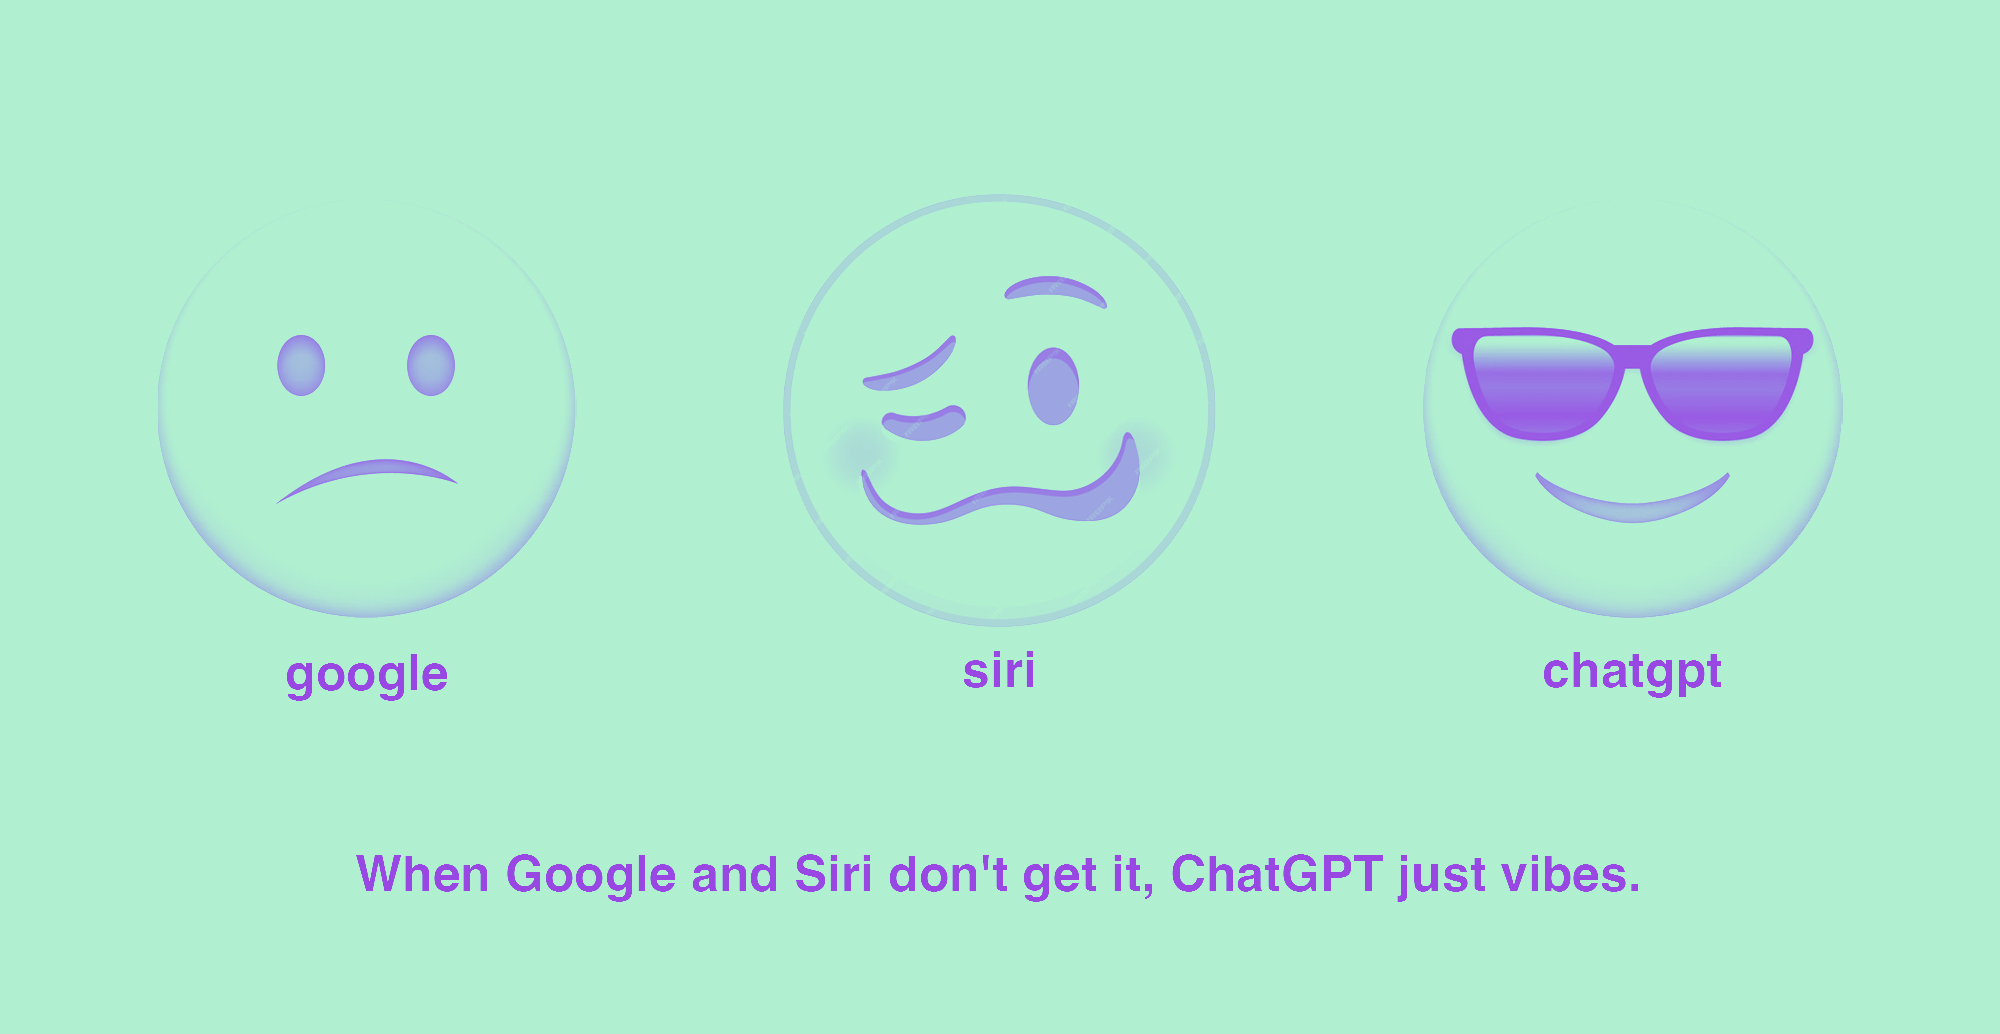 When Google and Siri don't get it, ChatGPT just vibes